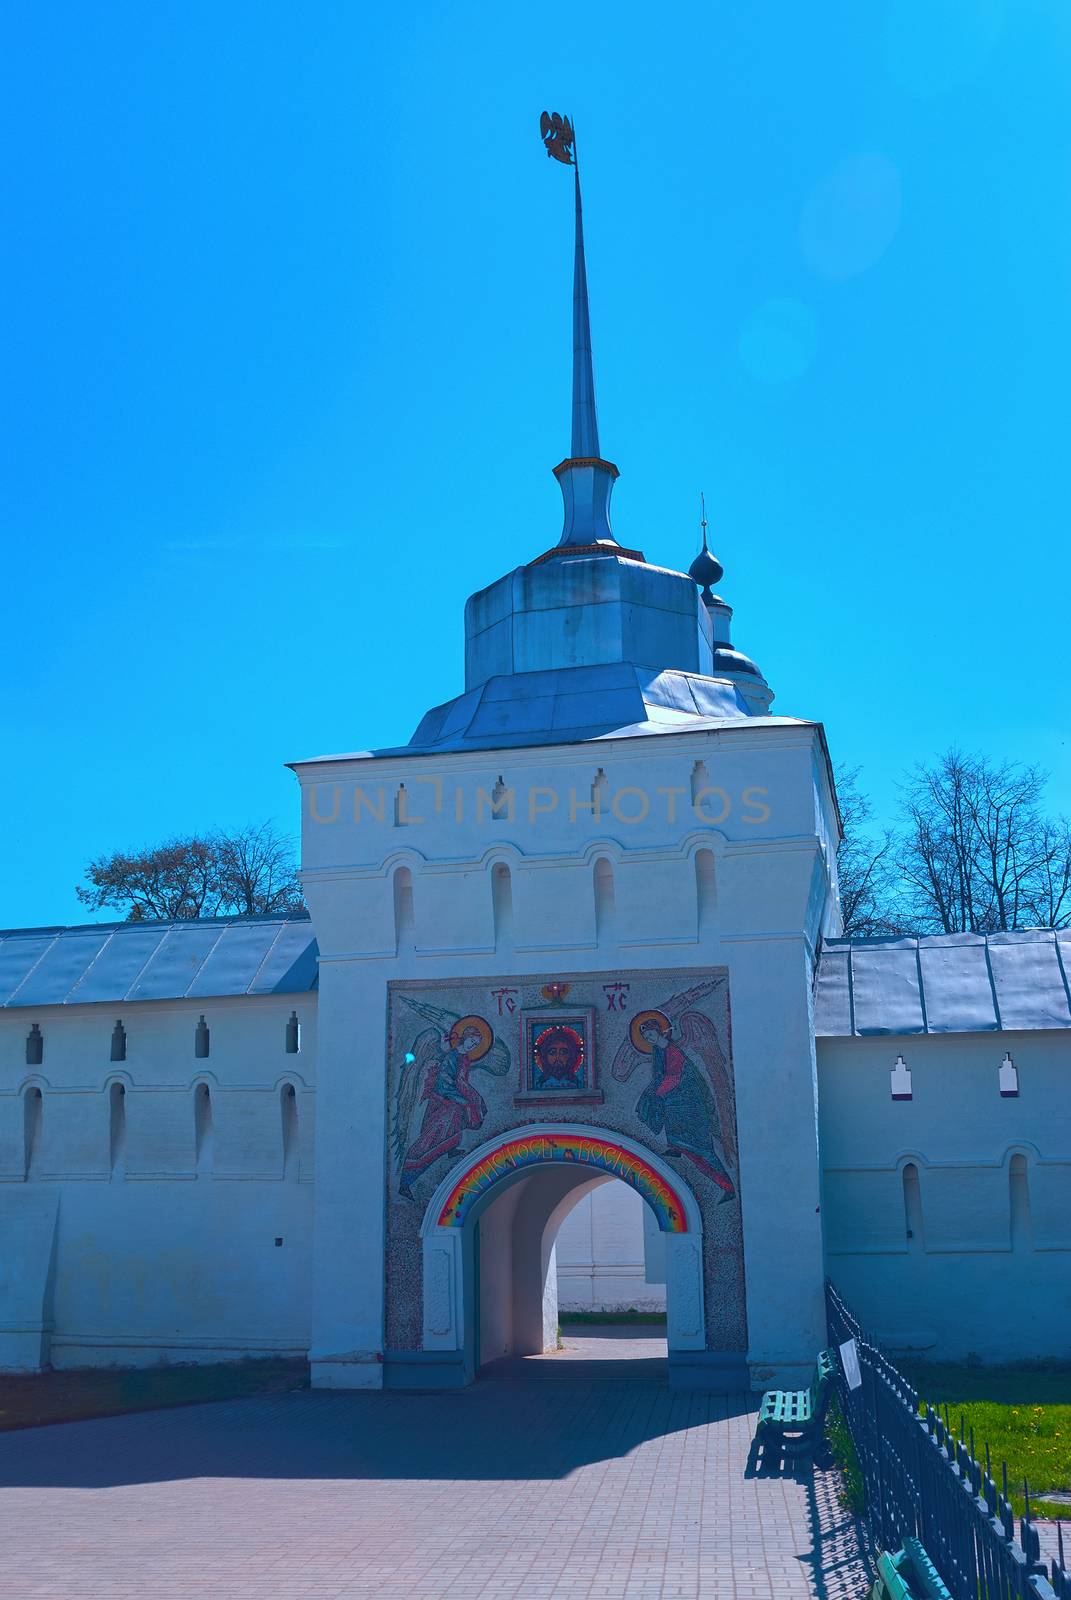 Entrance gate to the white orthodox monastery with the icon of Christ and the angels